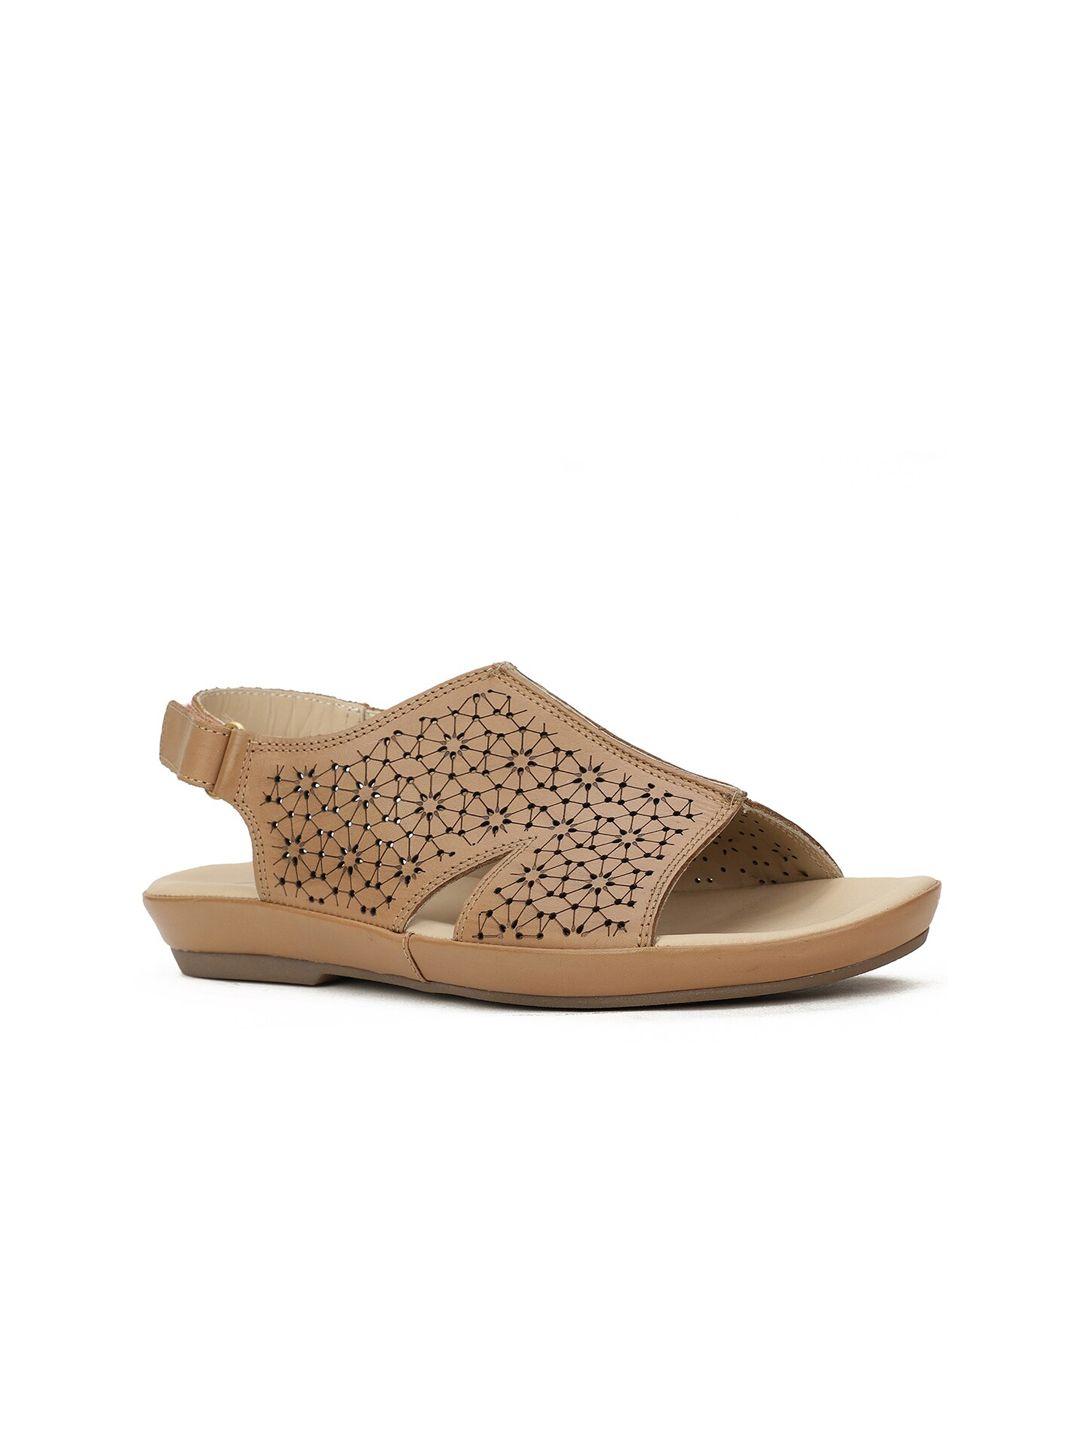 hush-puppies-women-open-toe-flats-with-laser-cuts